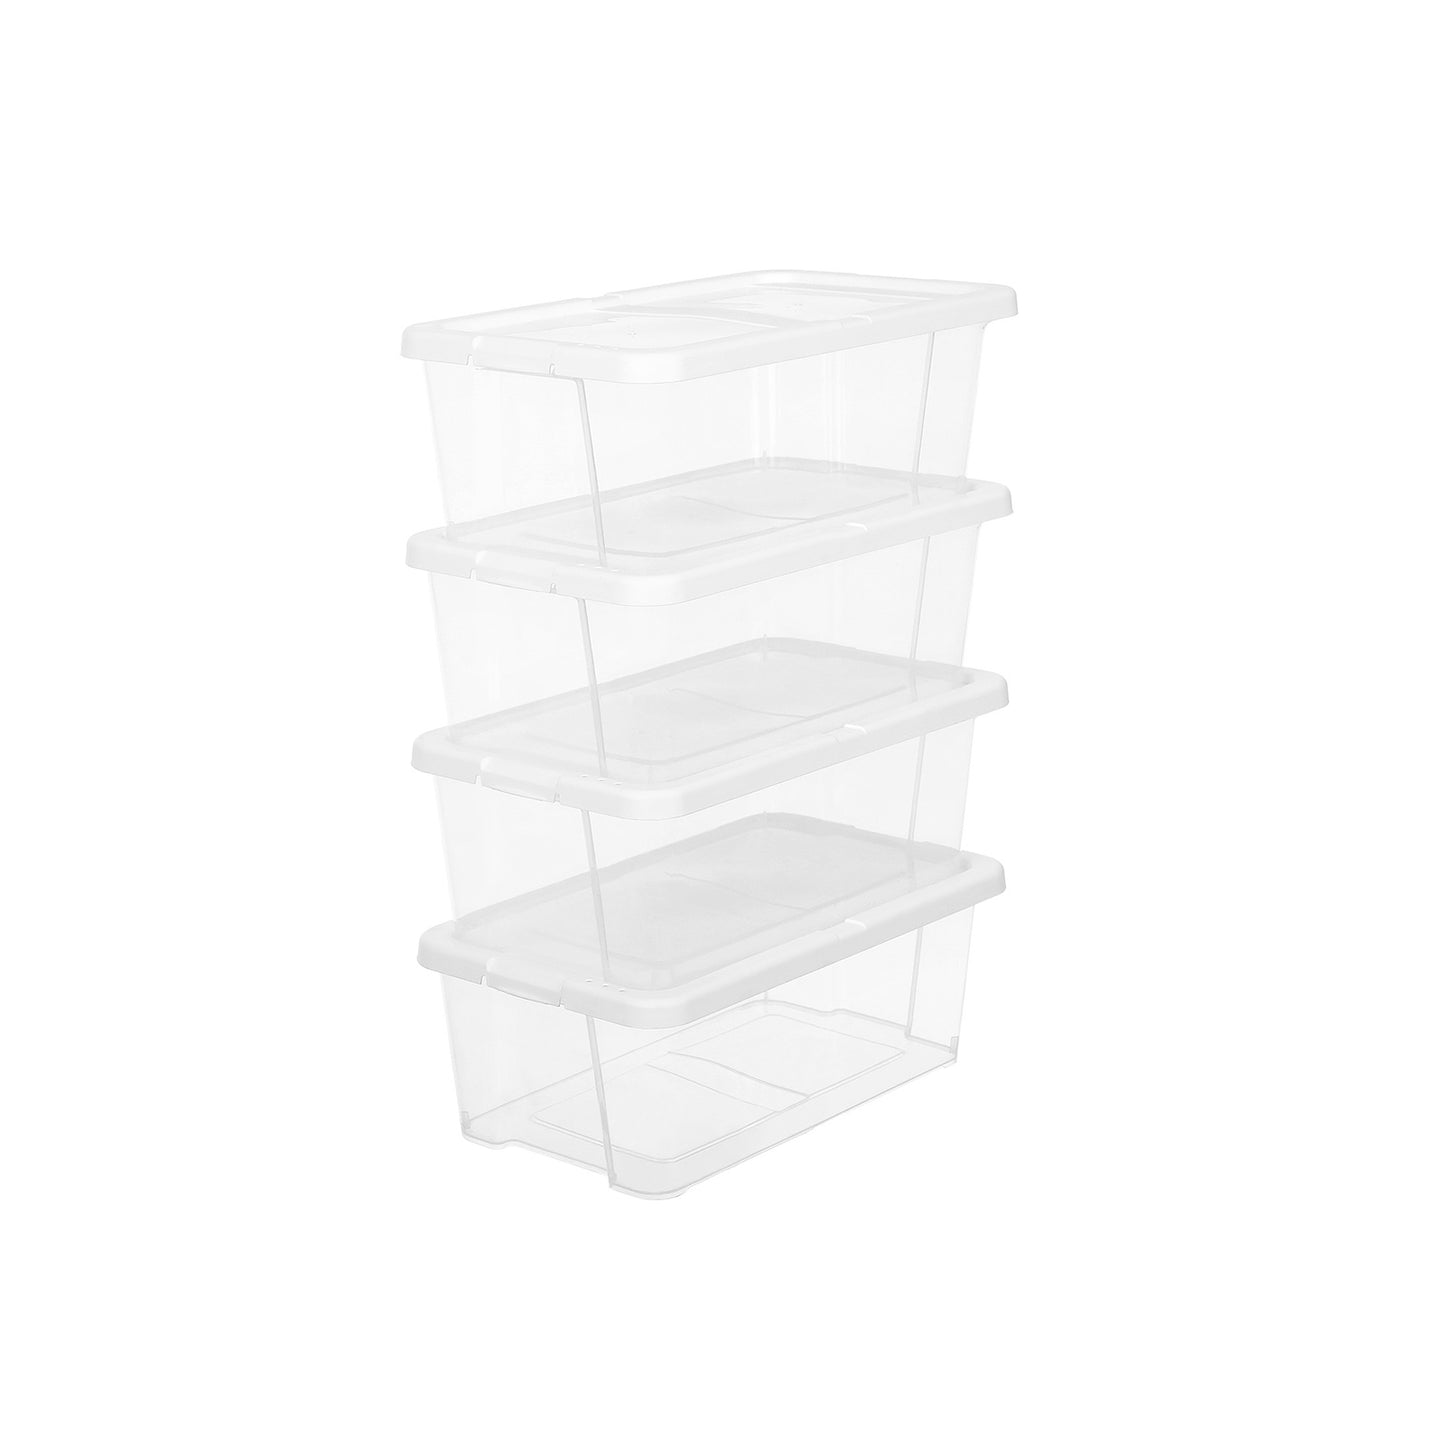 12 Set Shoe Boxes with Lids, Clear Transparent Stackable Versatile Storage Organiser, Sizes Up to UK 7.5, SONGMICS, 4